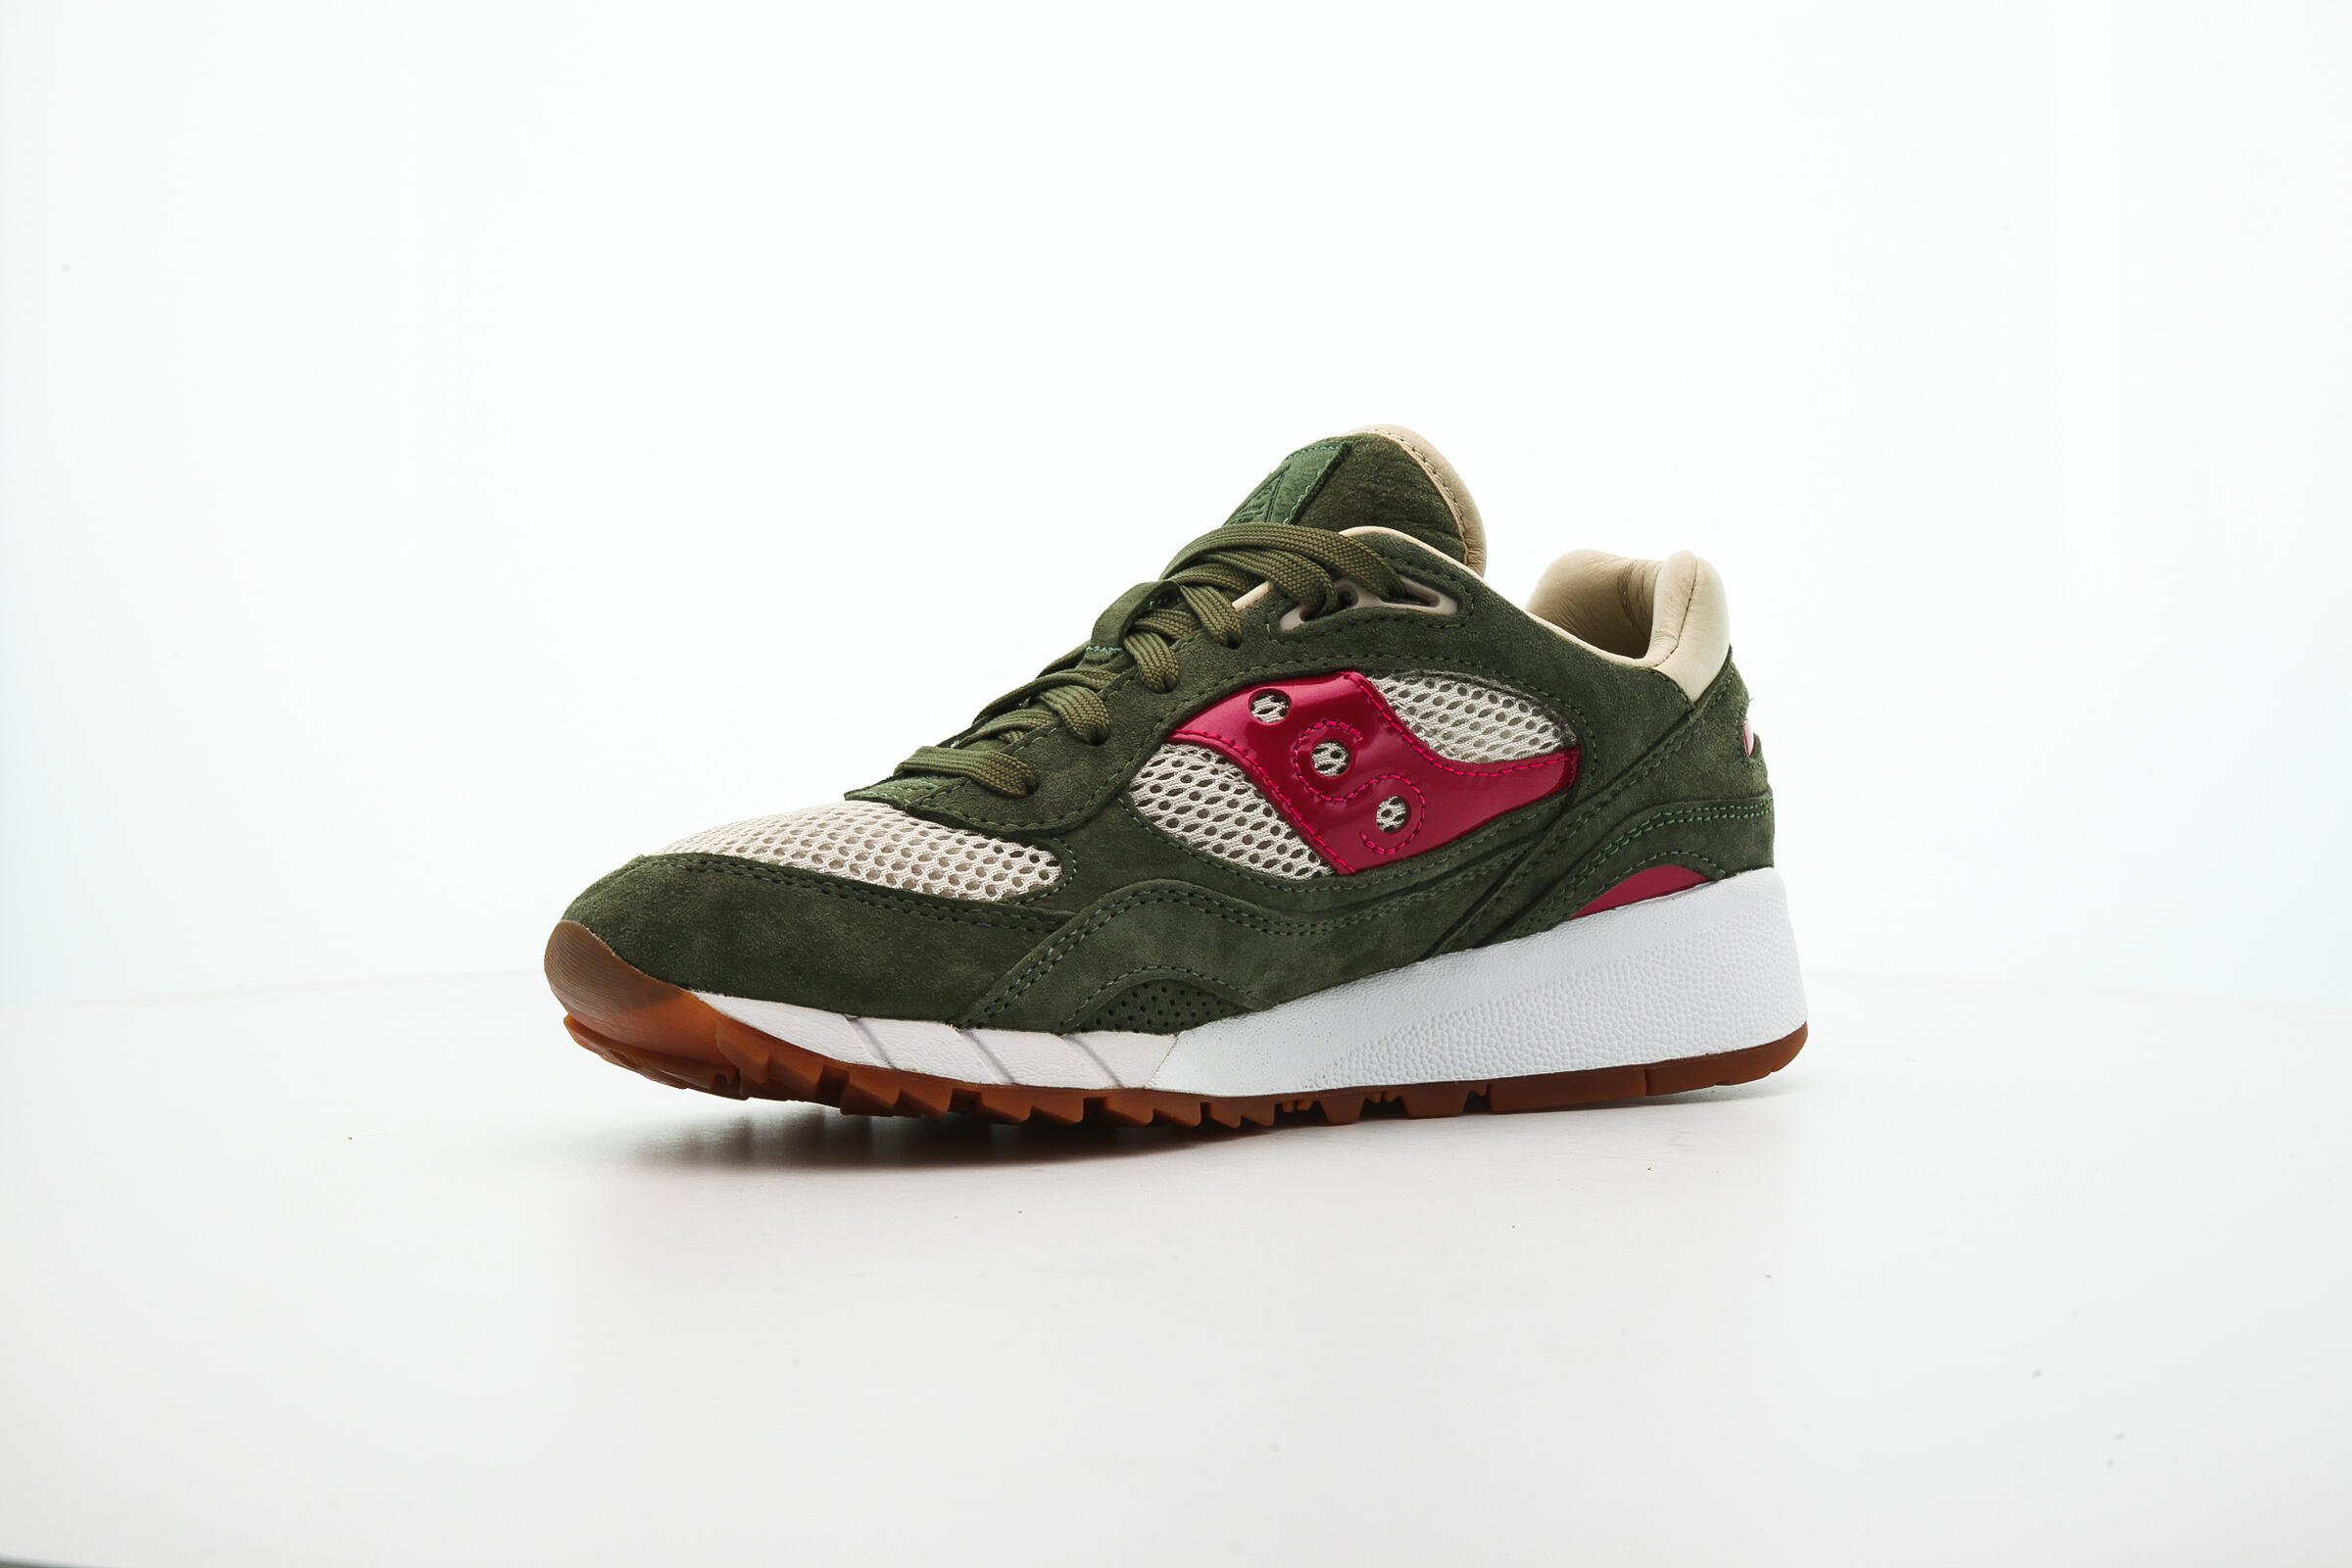 SAUCONY x UP THERE SHADOW 6000 "DOORS TO THE WORLD"